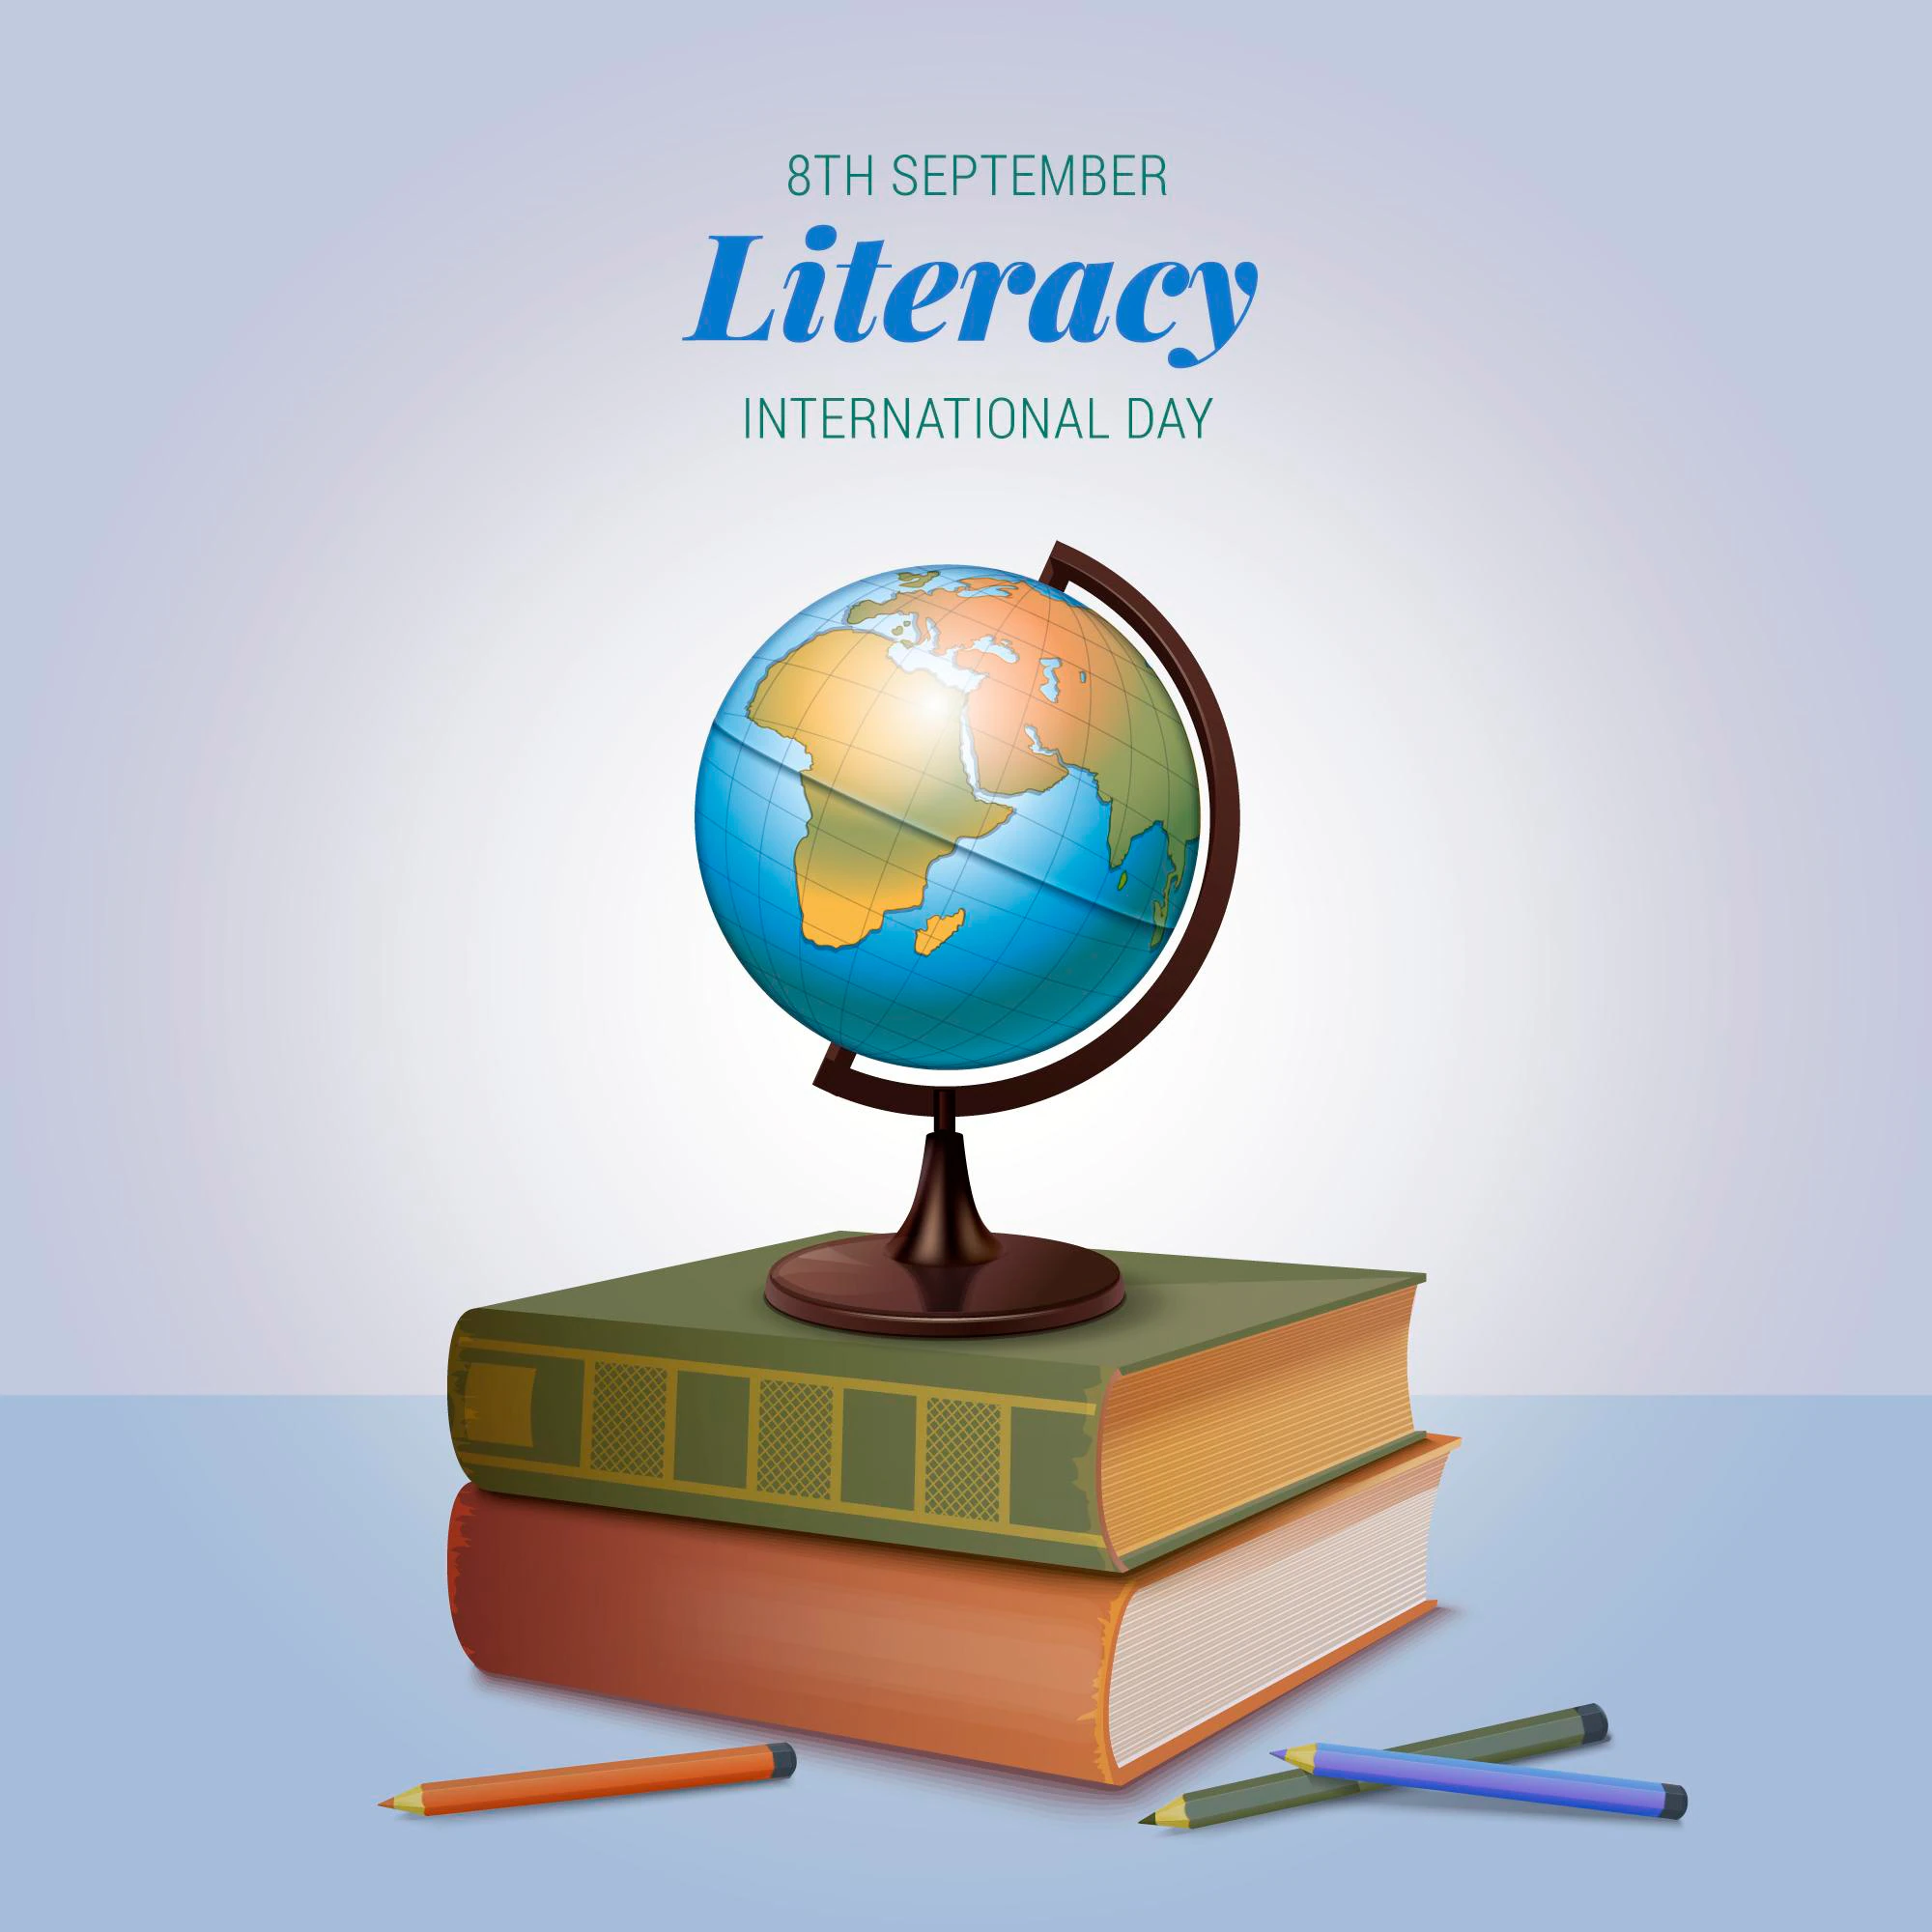 International Literacy Day 2022: Current Theme, Quotes, Images, Slogans, Messages, Images, Wishes, Greetings, and Captions